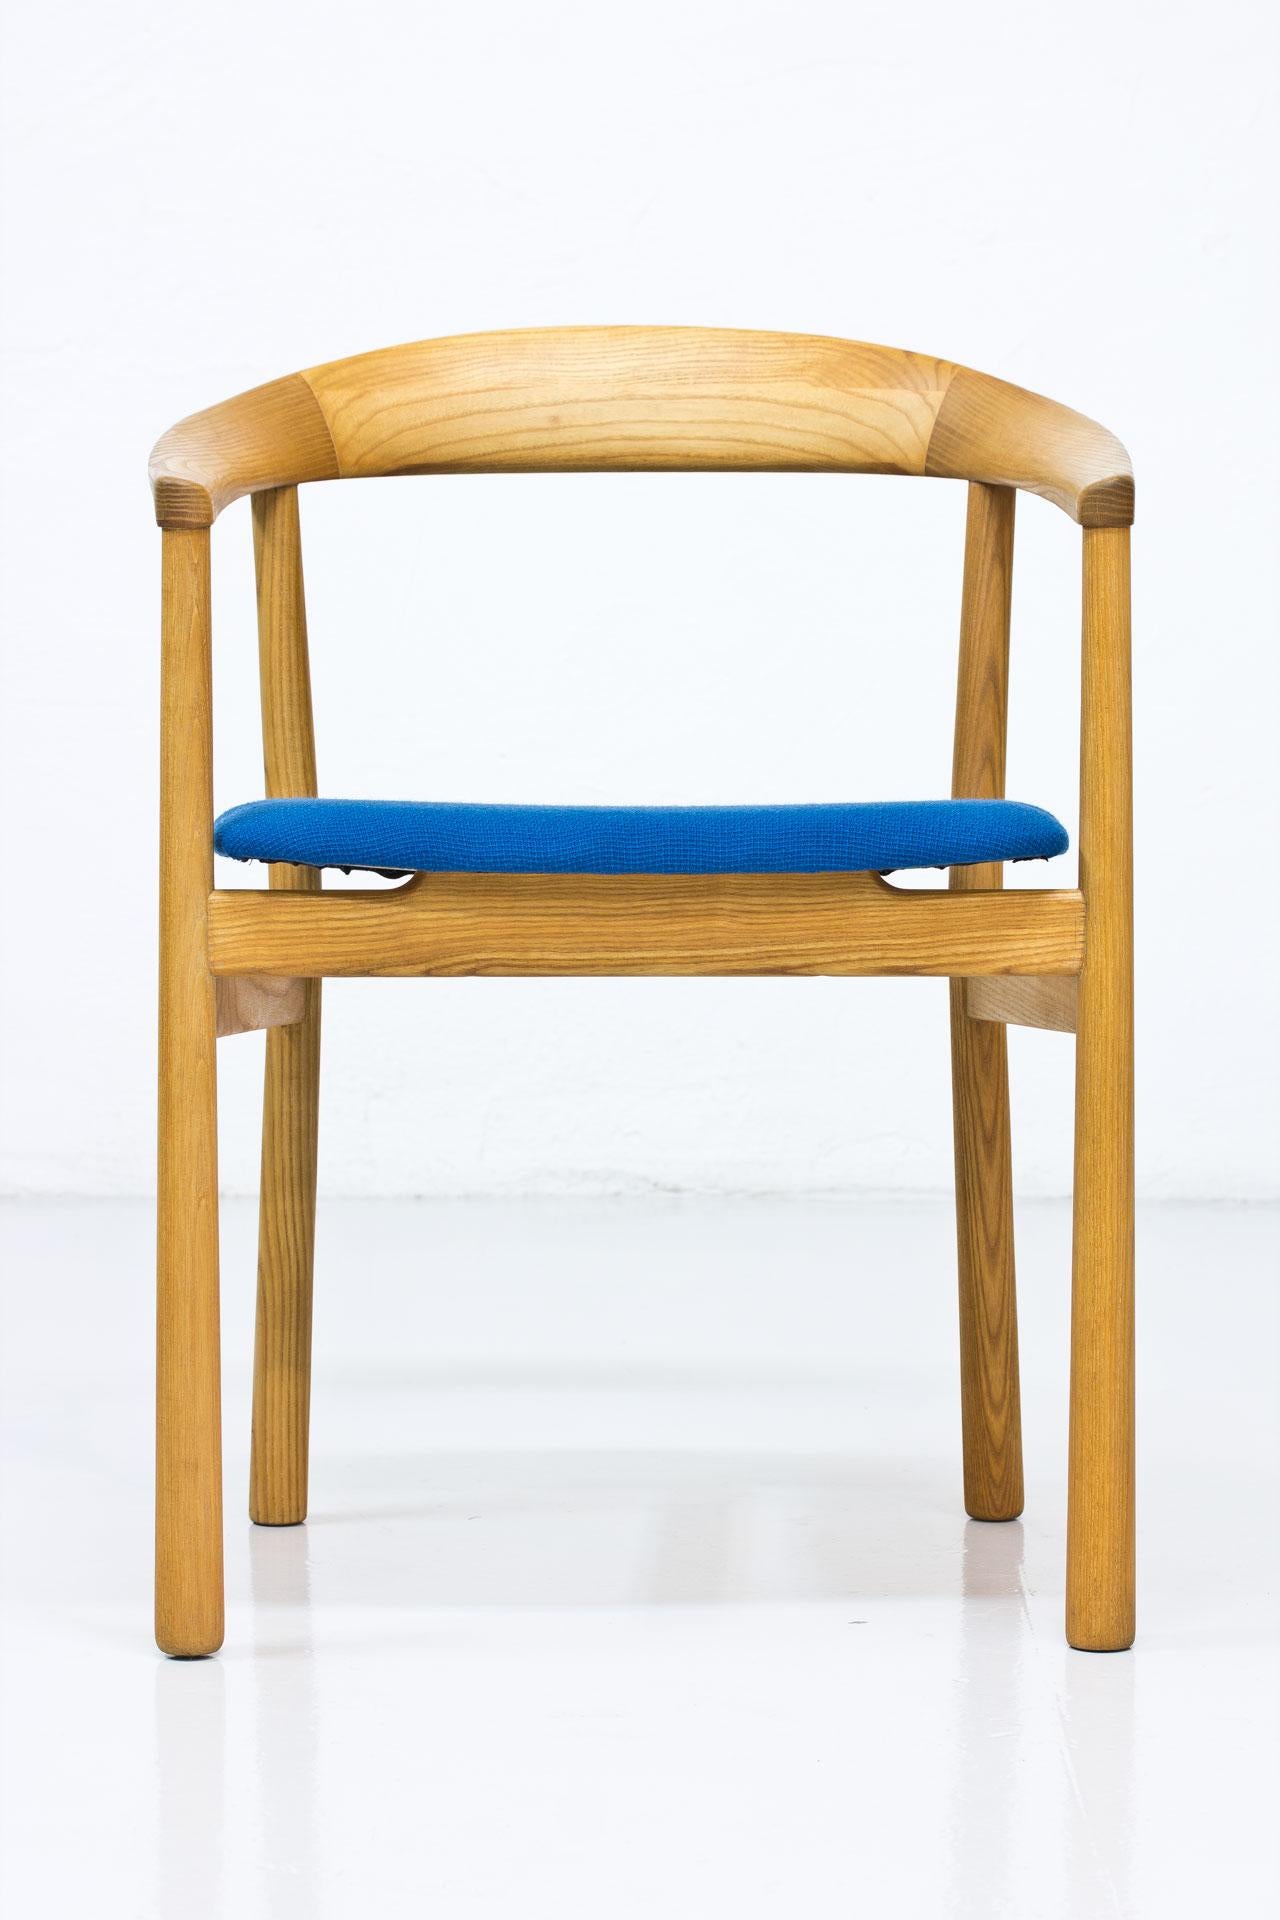 Mid-20th Century Scandinavian Modern Armchair by Carl-Axel Acking, Sweden